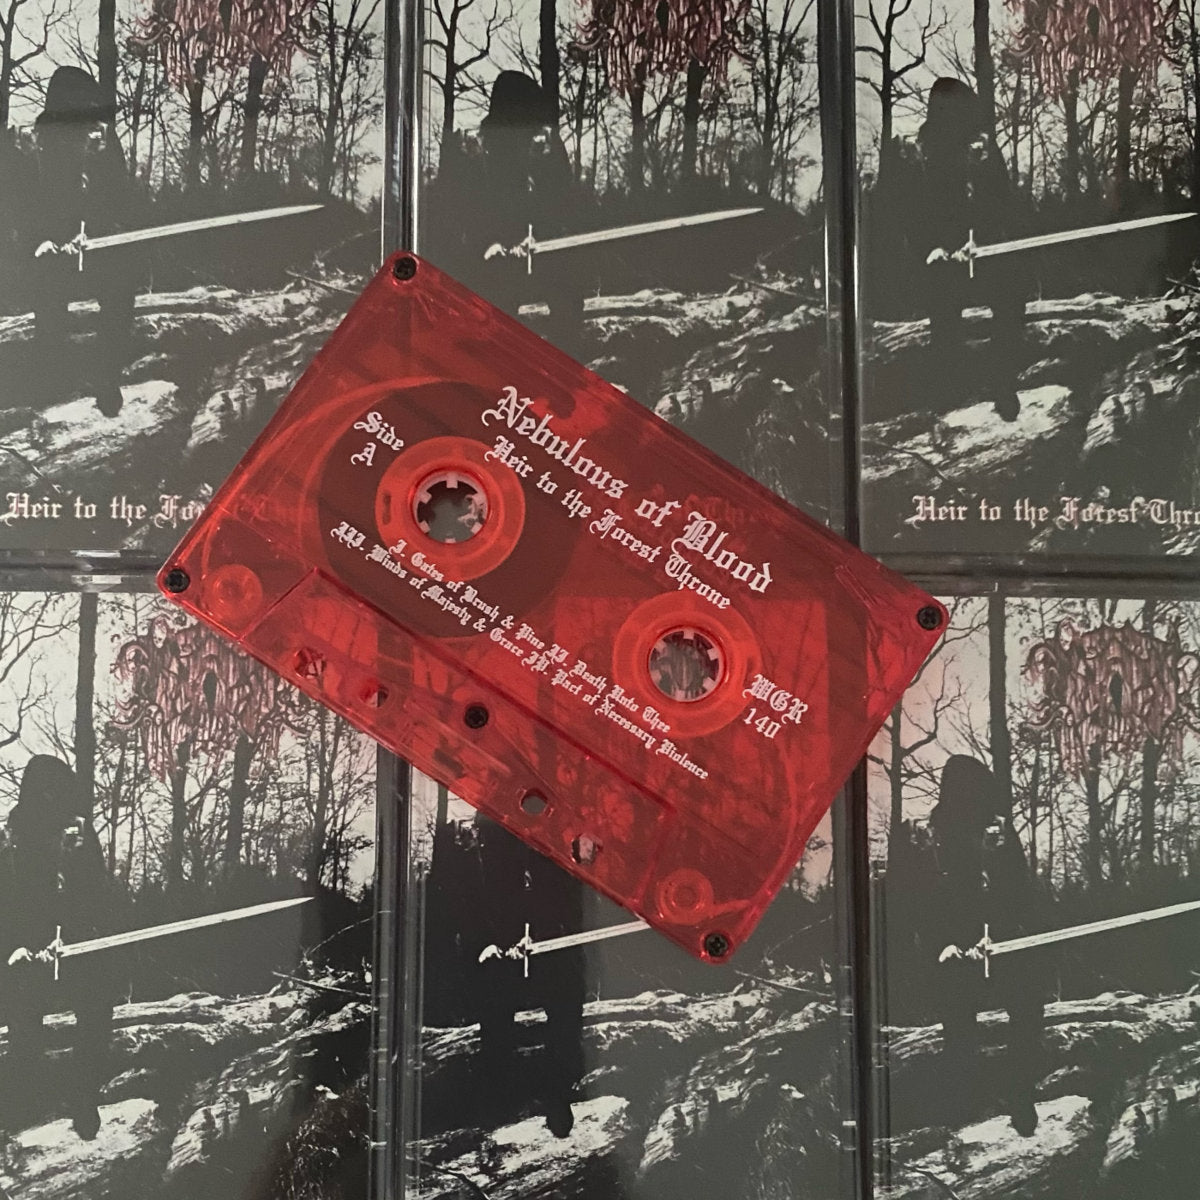 [SOLD OUT] NEBULOUS OF BLOOD "Heir to the Forest Throne" Cassette Tape (lim.100)